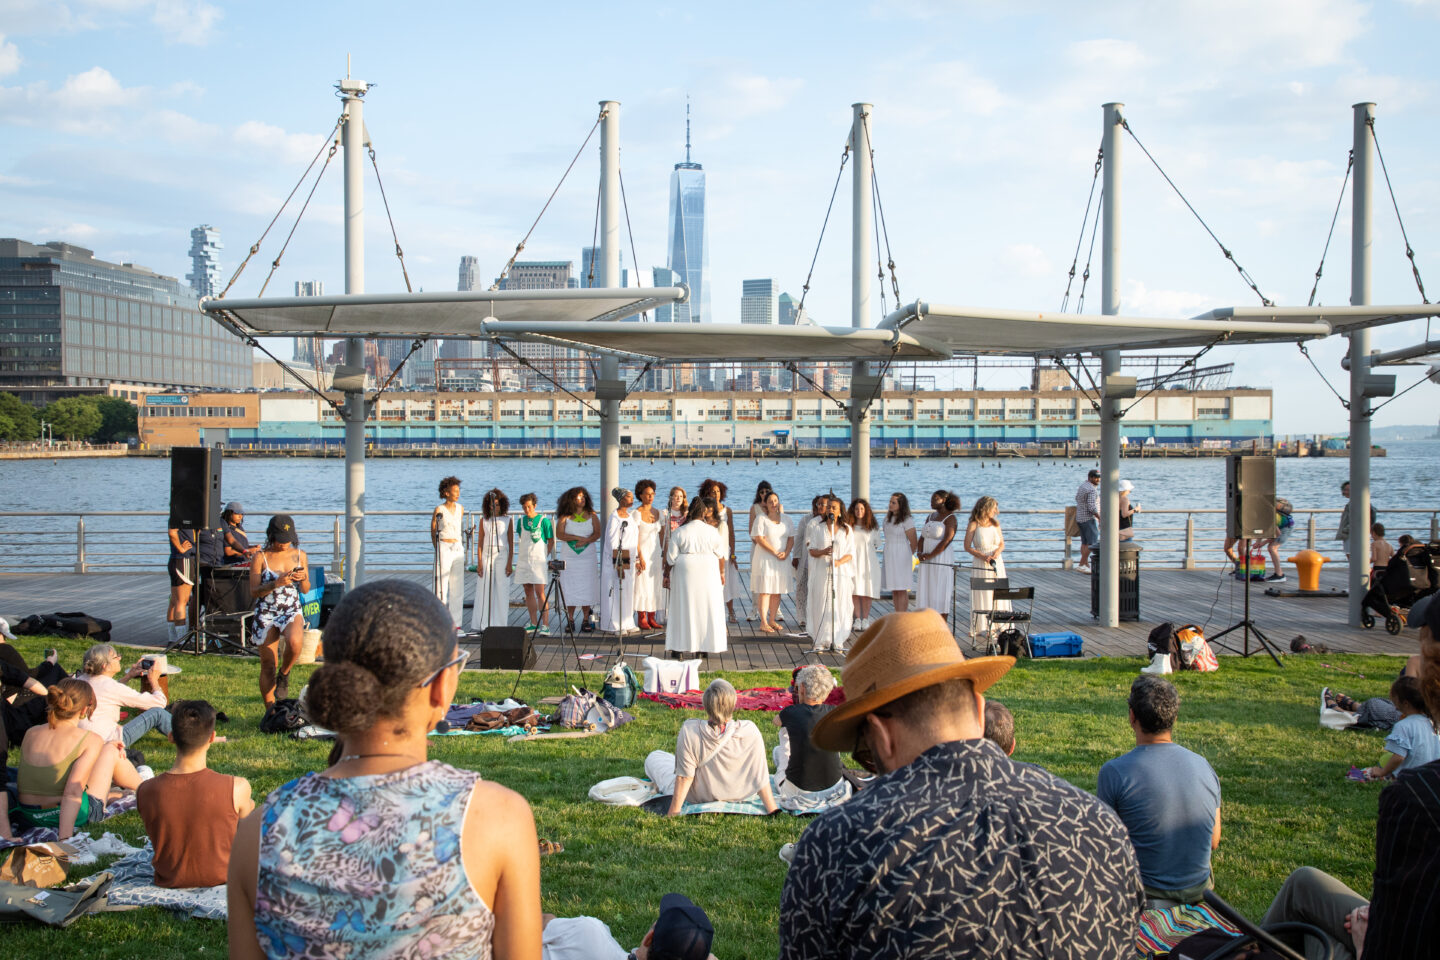 Resistance Revival Chorus performing on Pier 45 as part of a Sunset on the Hudson concert